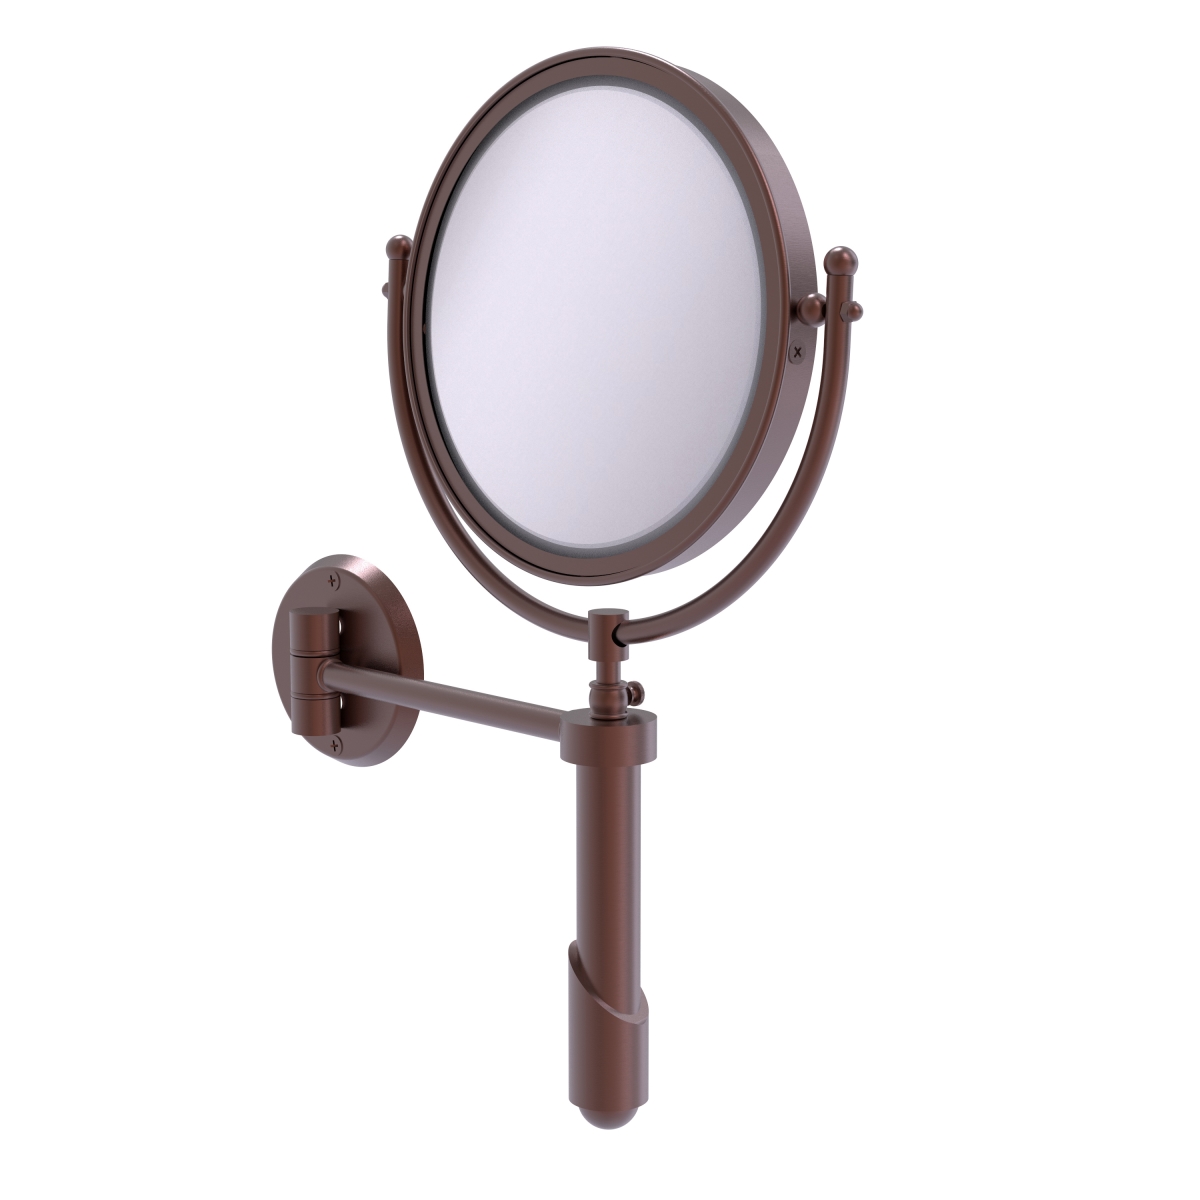 SHM-8-2X-CA 8 in. dia. Soho Collection Wall Mounted Make-Up Mirror with 2X Magnification, Antique Copper -  Allied Brass, SHM-8/2X-CA